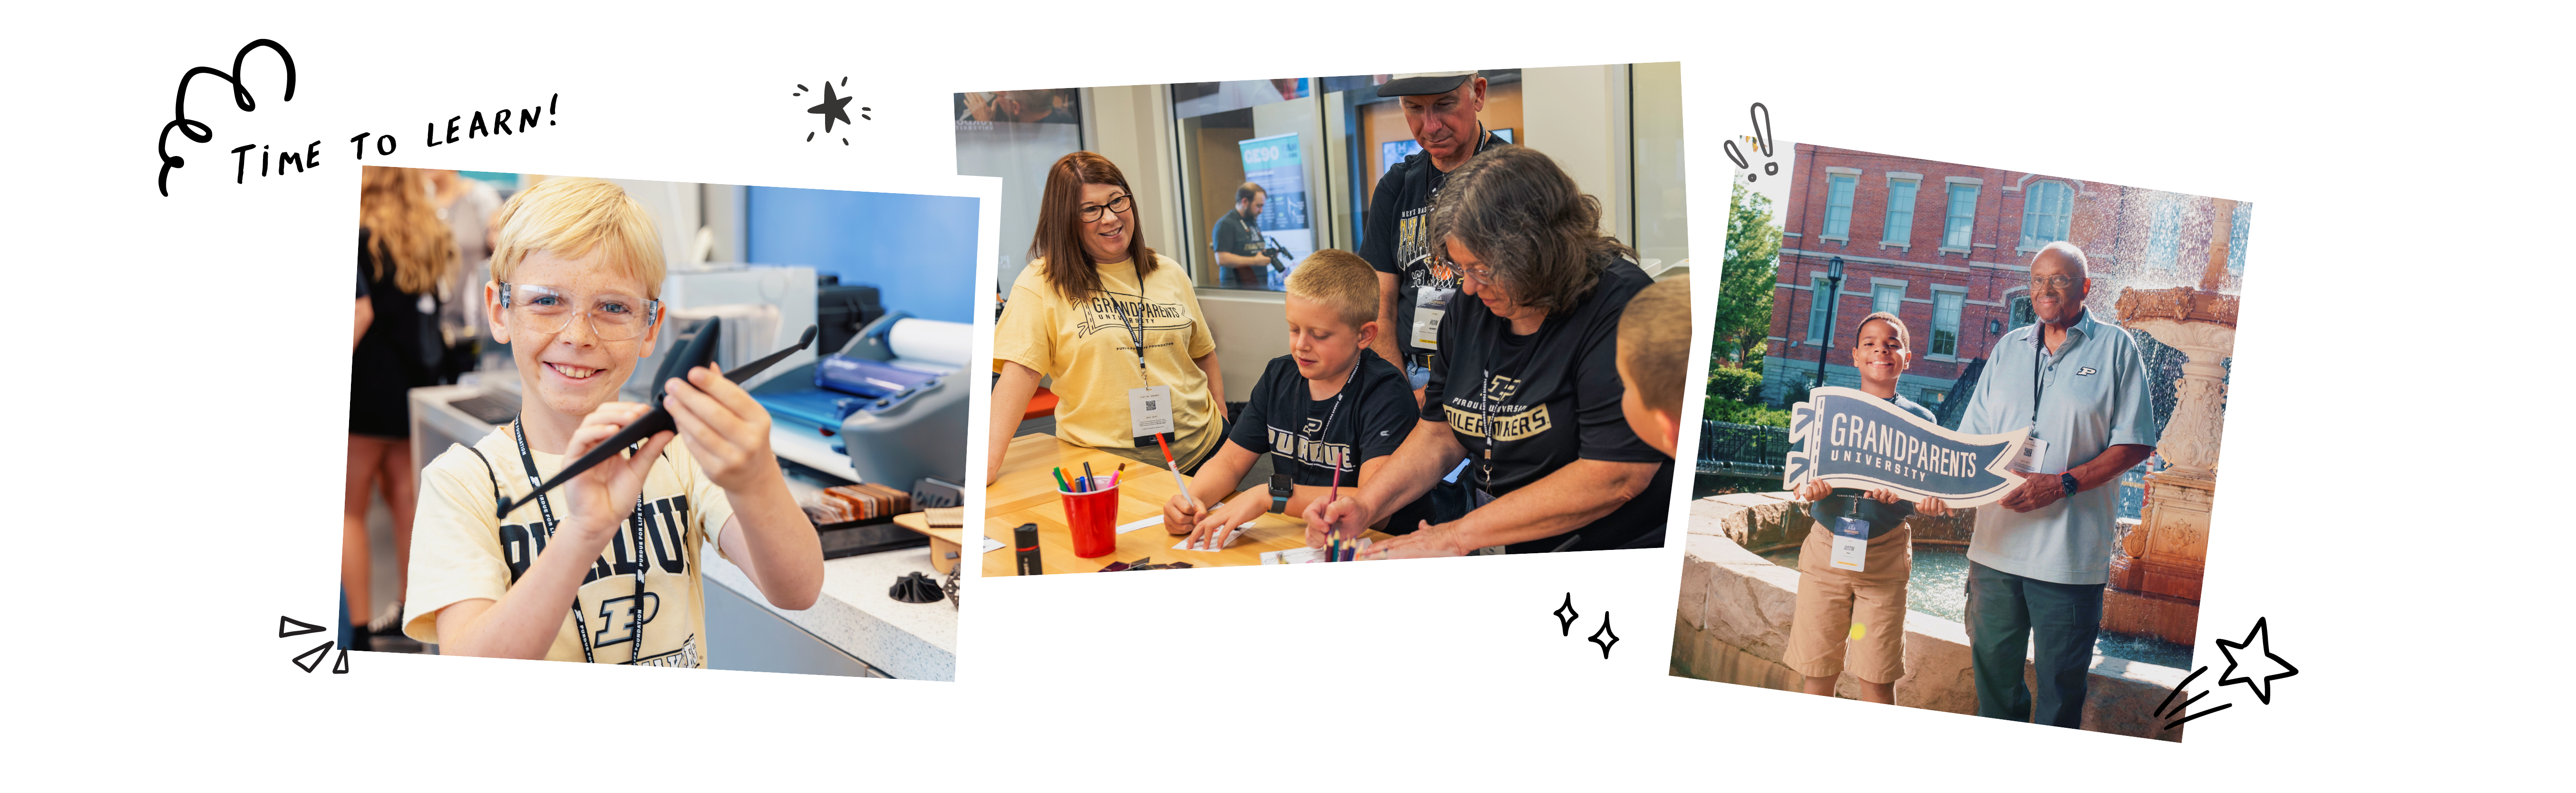 Featured image showing grandparents and grandkids during the Grandparent University event.